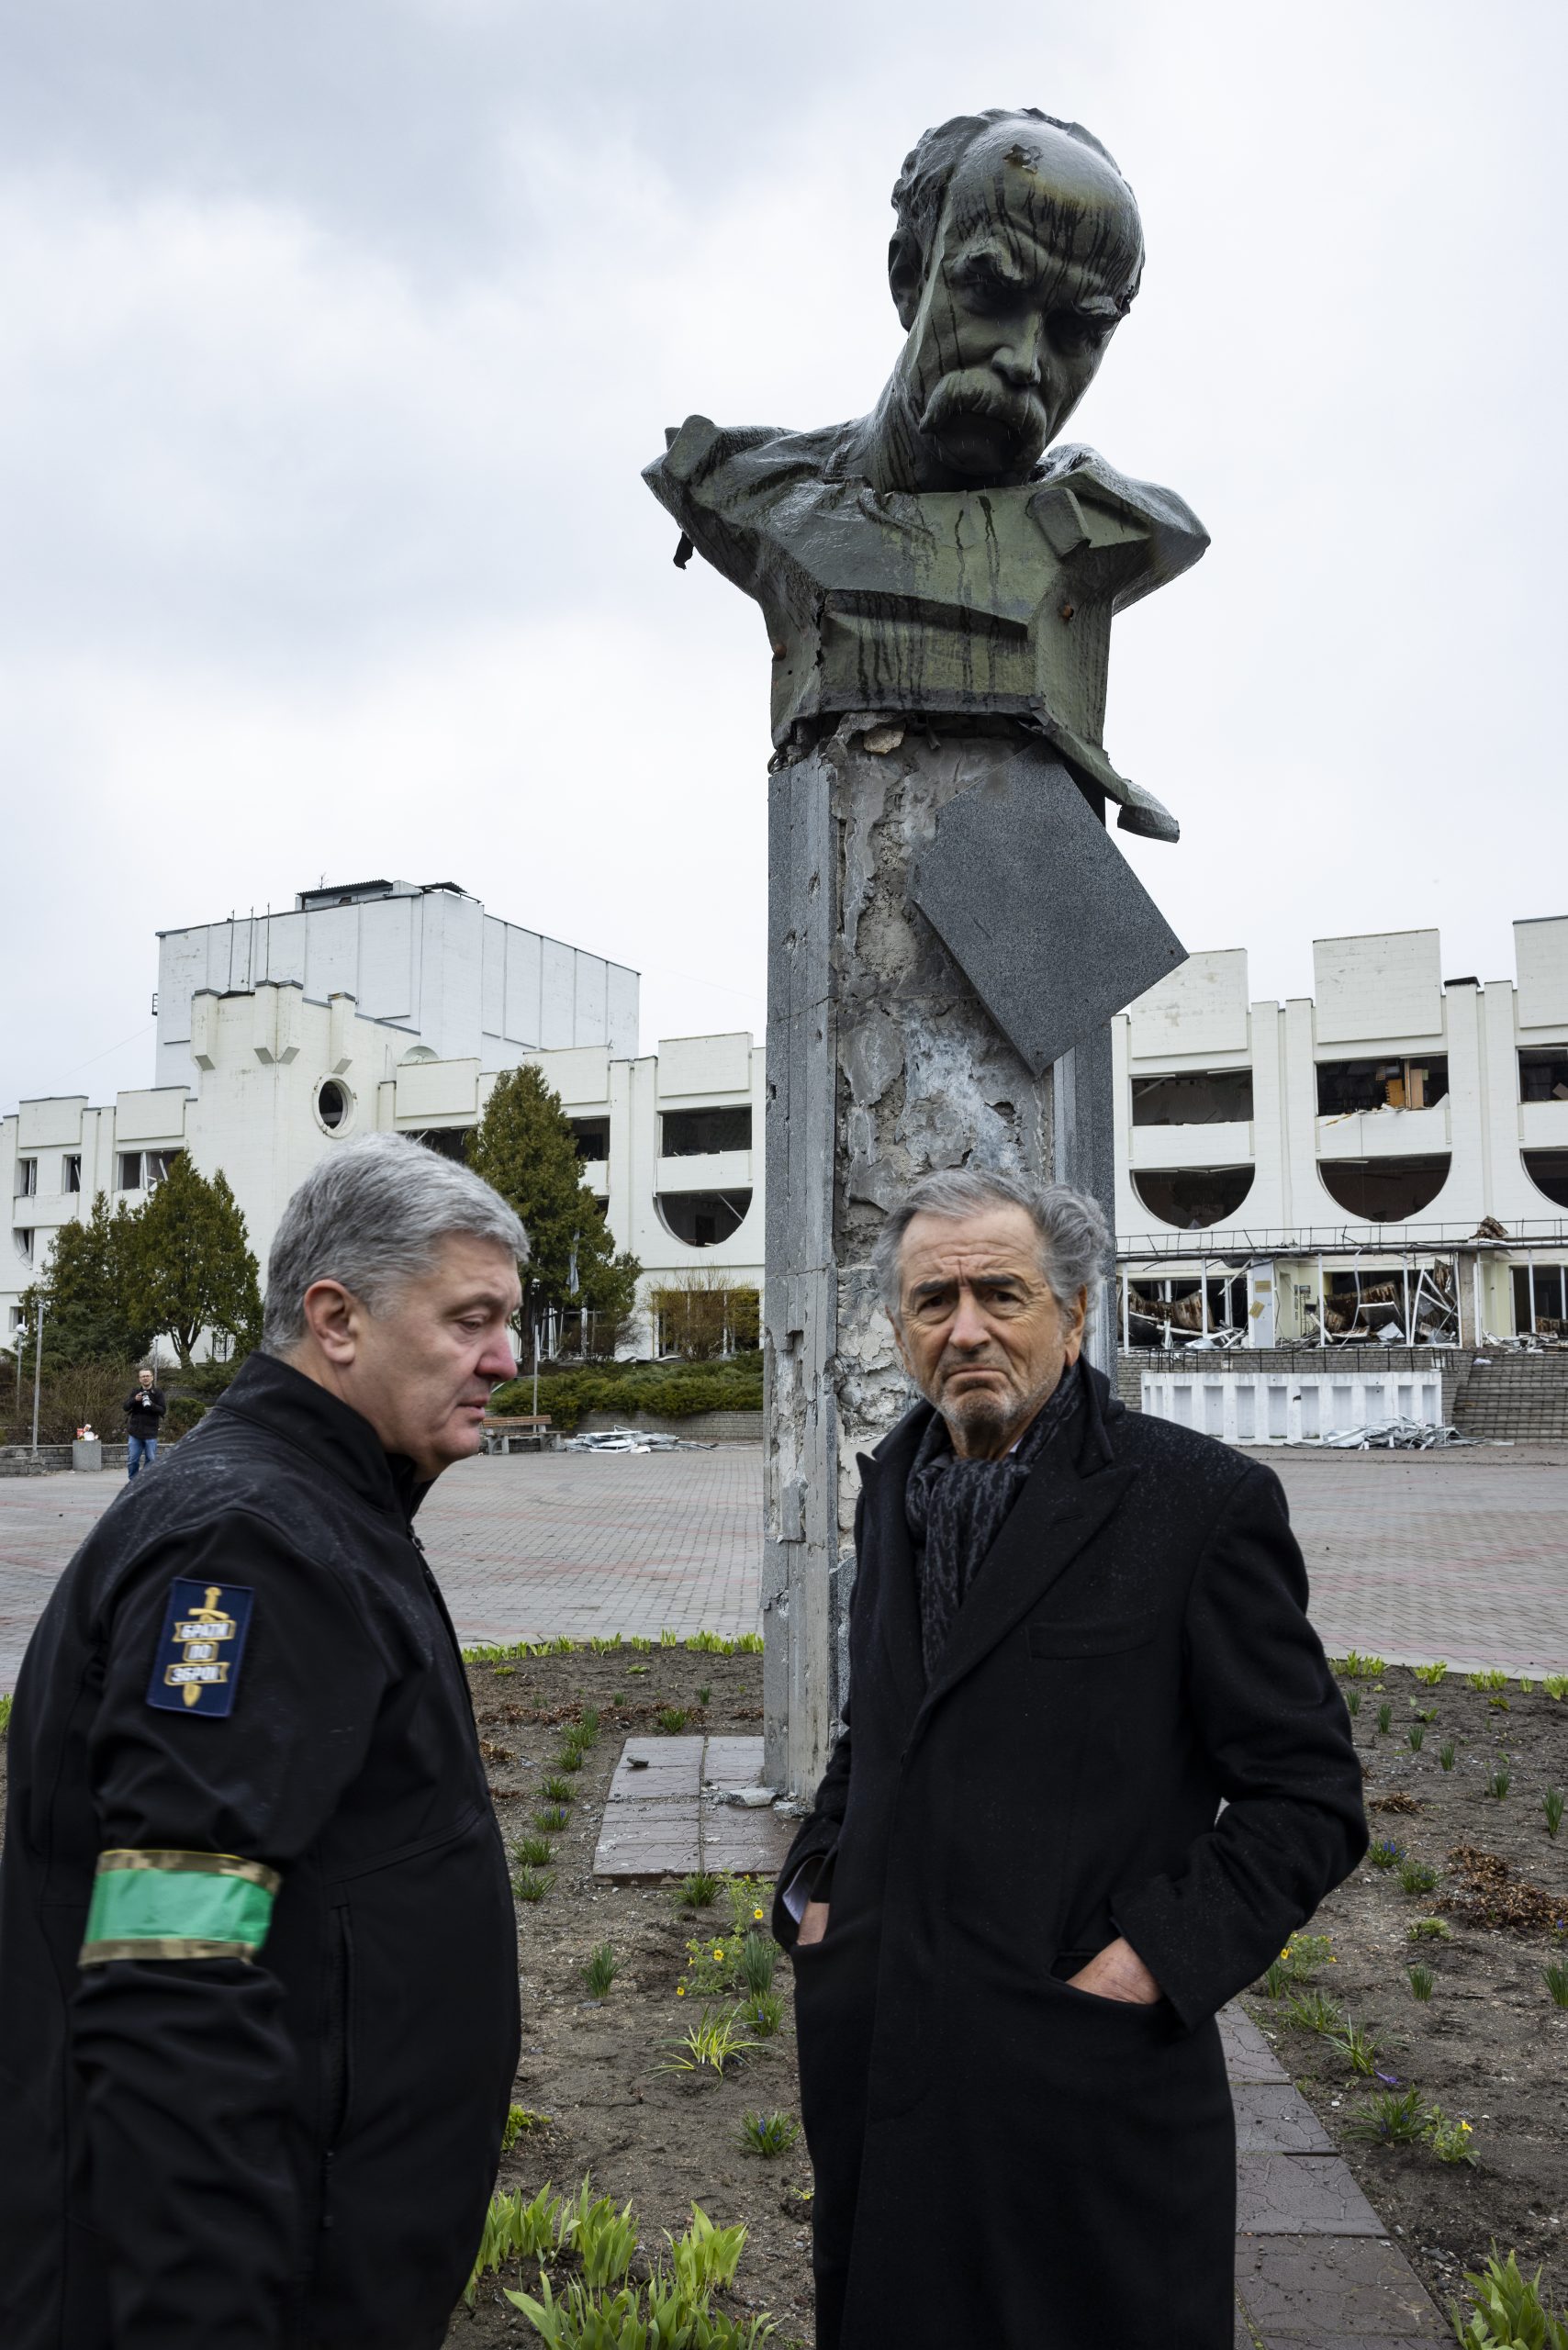 With Petro Poroshenko in Borodyanka, at the foot of the statue of the Ukrainian poet Taras Shevchenko which was vandalized and riddled with Russian bullets.